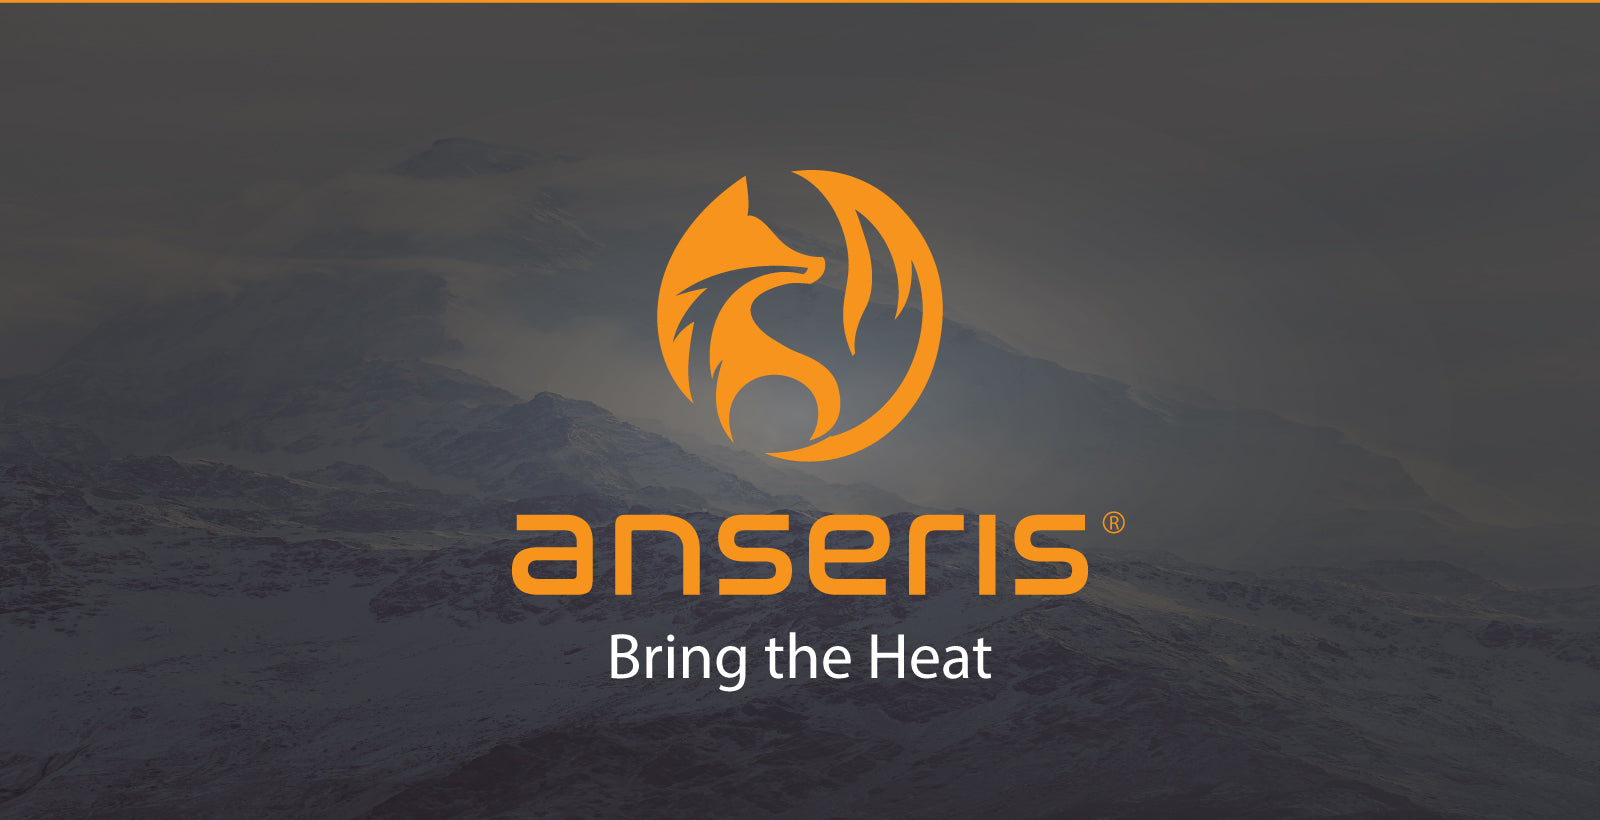 anseris heated apparel brings the heat with custom heated clothing like heated insoles and heated jackets